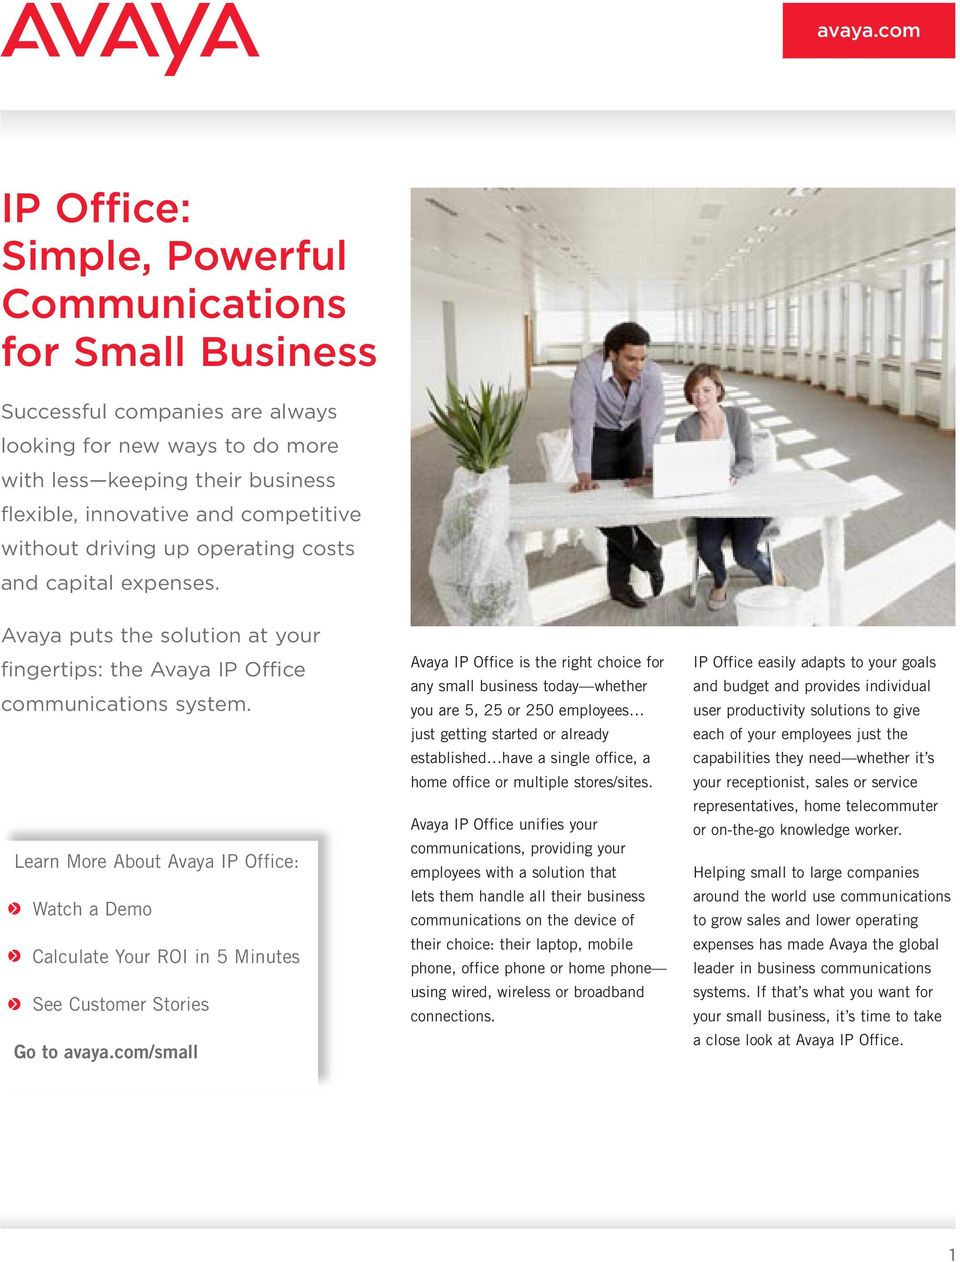 Learn More About Avaya IP Office: Watch a Demo Calculate Your ROI in 5 Minutes See Customer Stories Go to avaya.